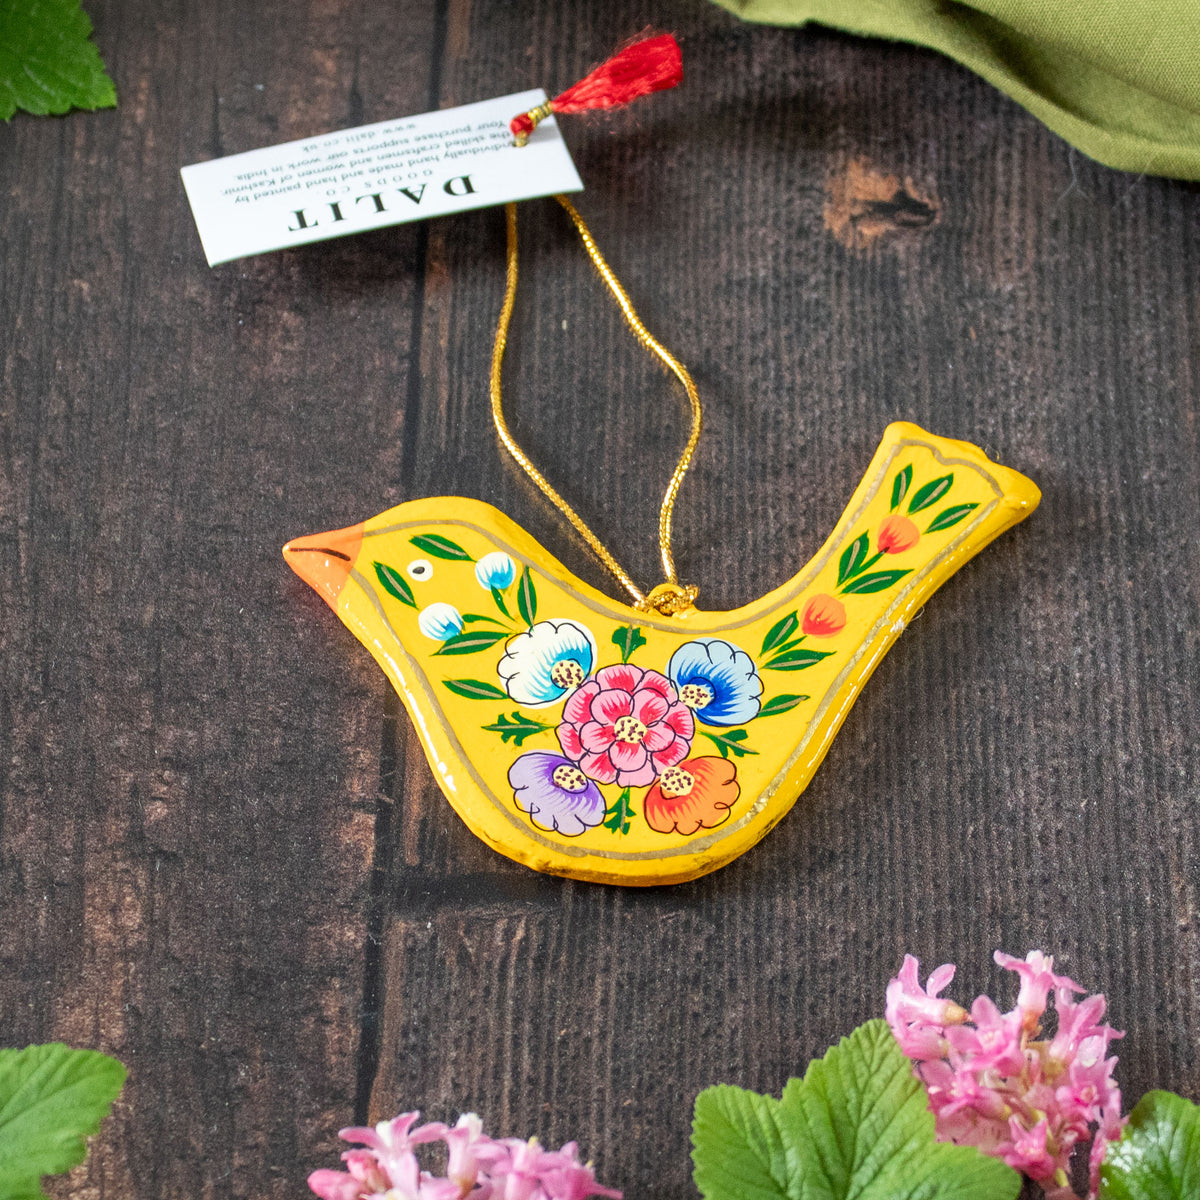 Hanging Spring Decoration - Painted Bird - Yellow Flowers